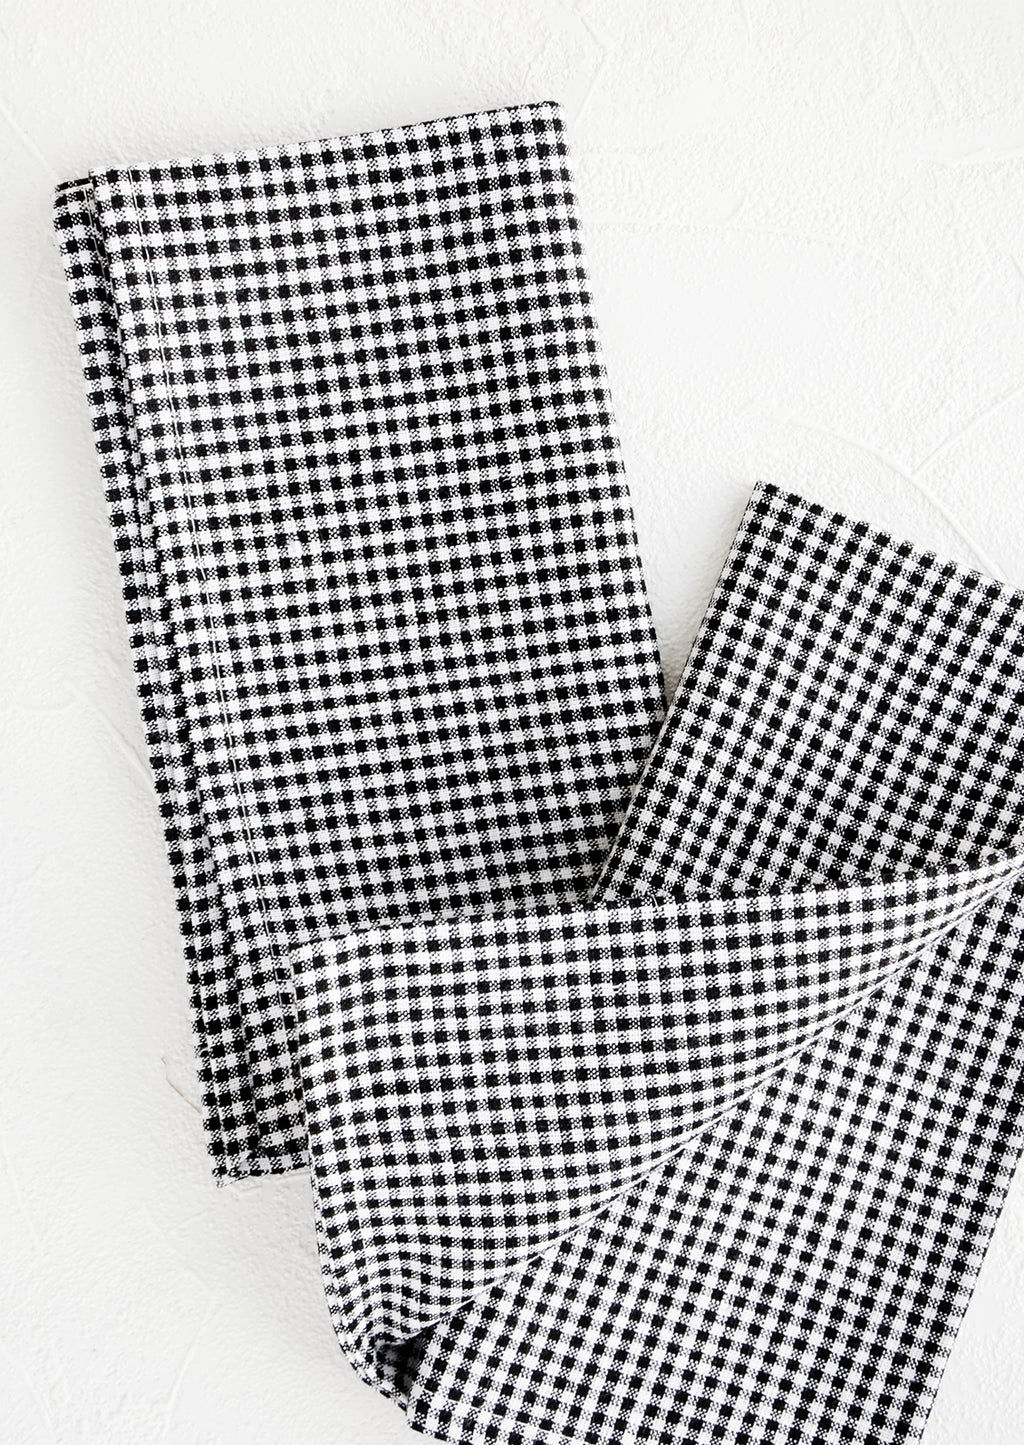 4: Pair of fabric dinner napkins in black and white gingham pattern